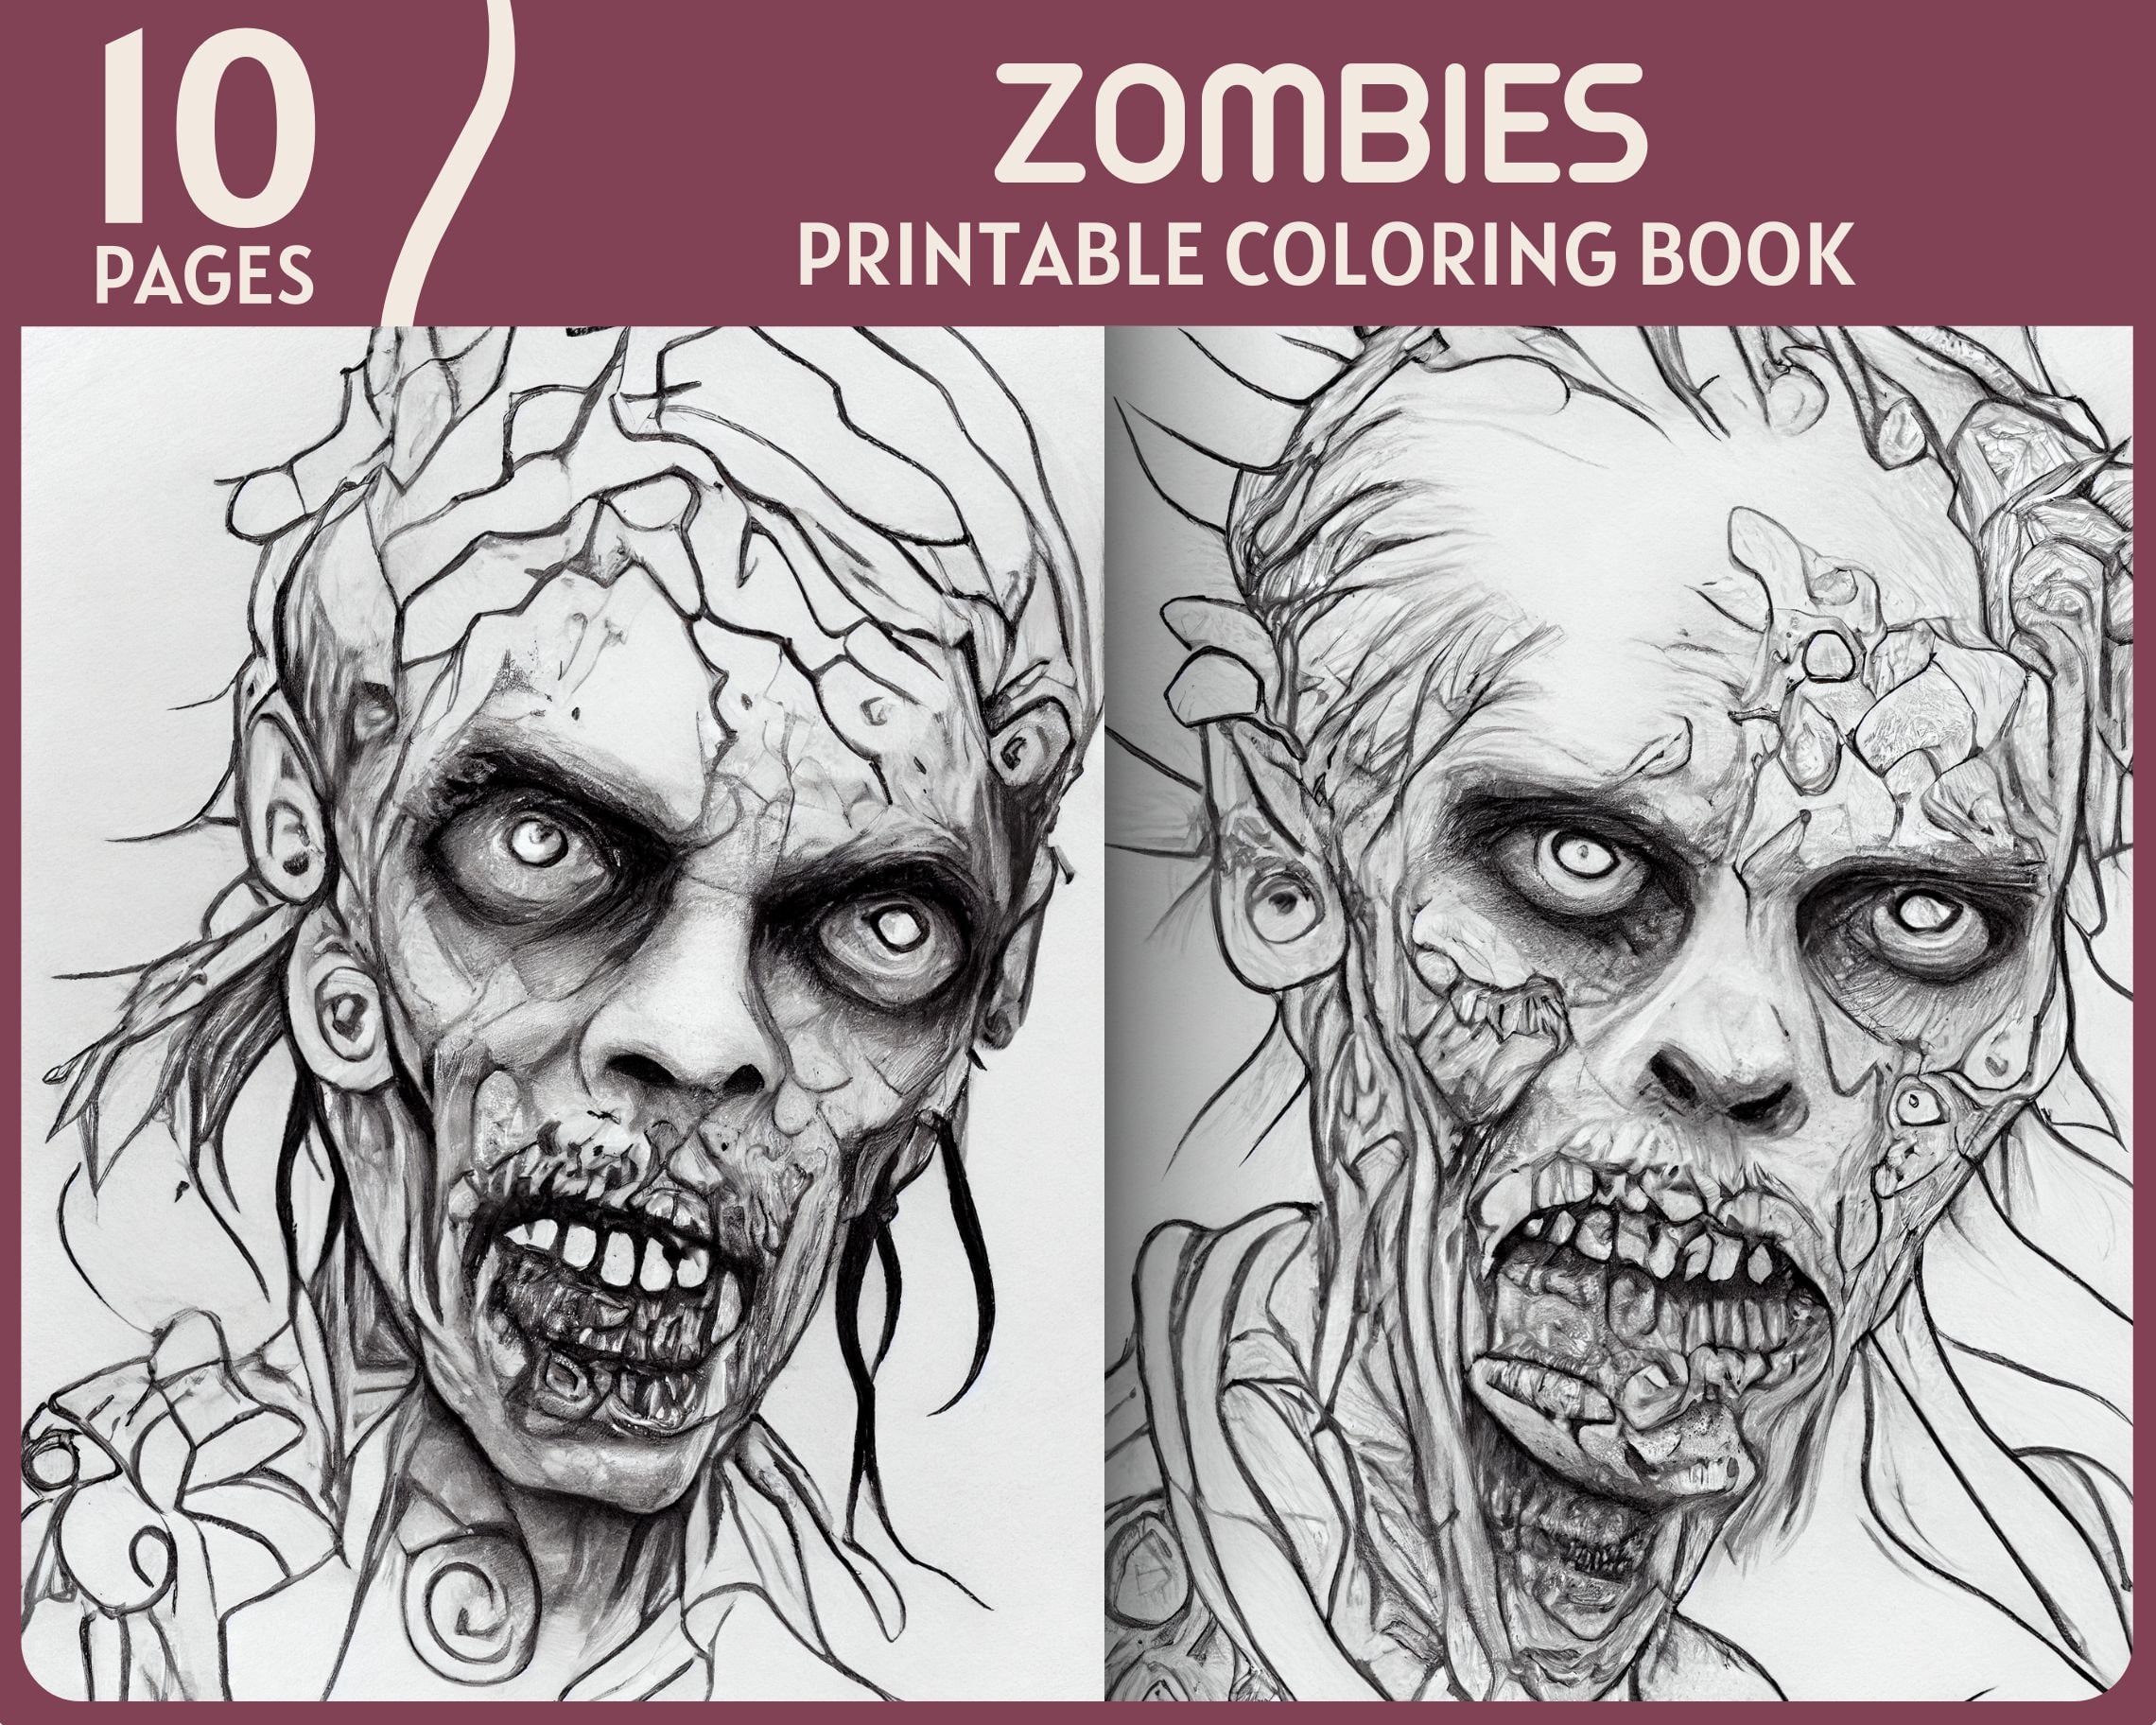 Zombies coloring pages for adults horror theme printable coloring book ugly zombie faces coloring page digital download